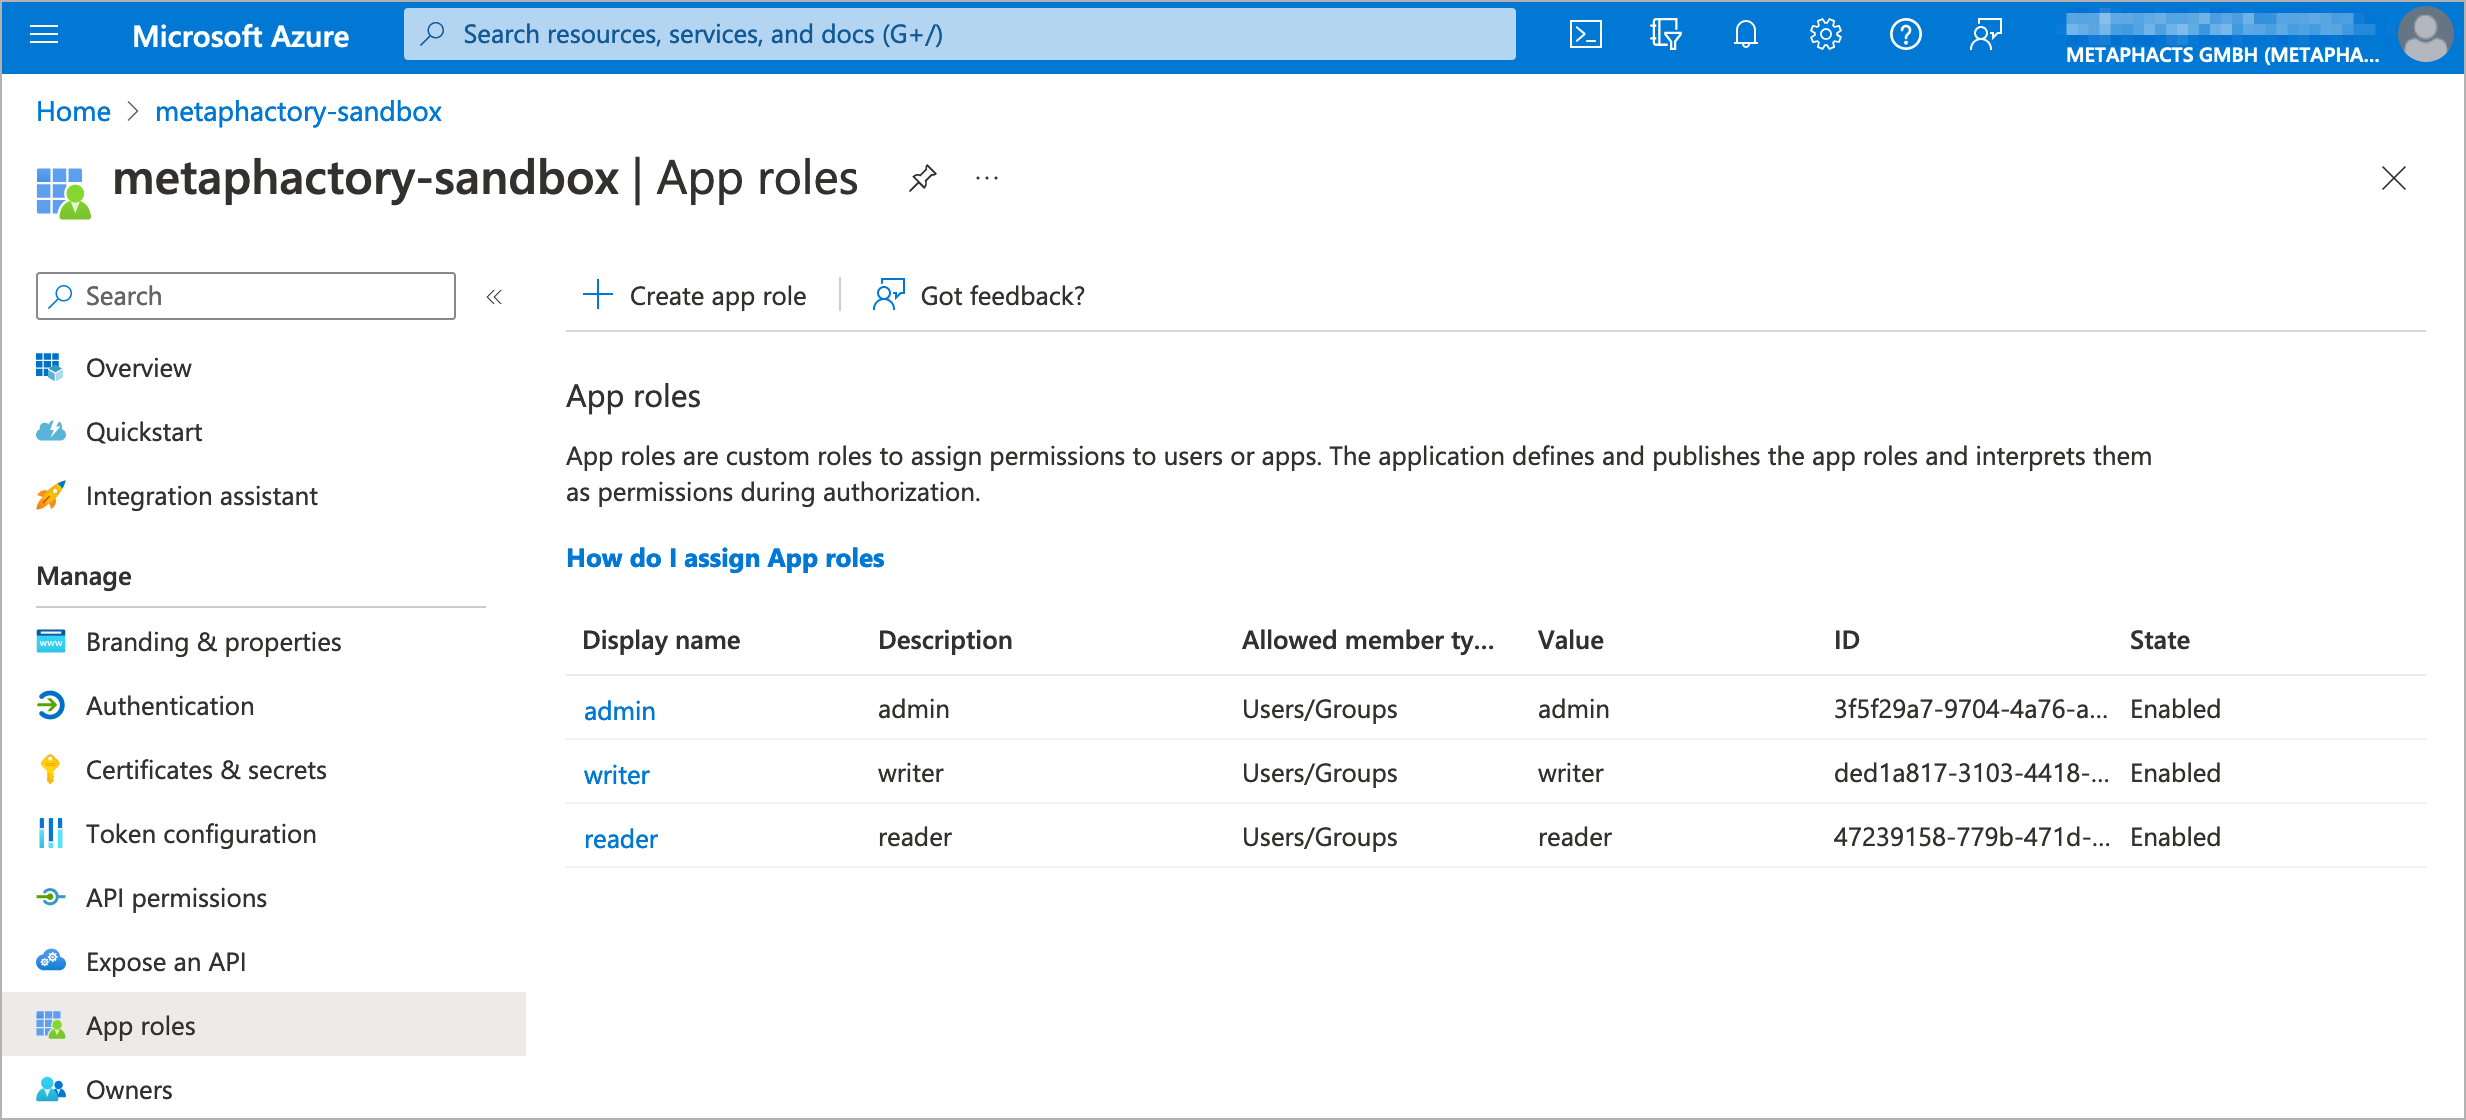 App roles overview for metaphactory-sandbox on Microsoft Azure